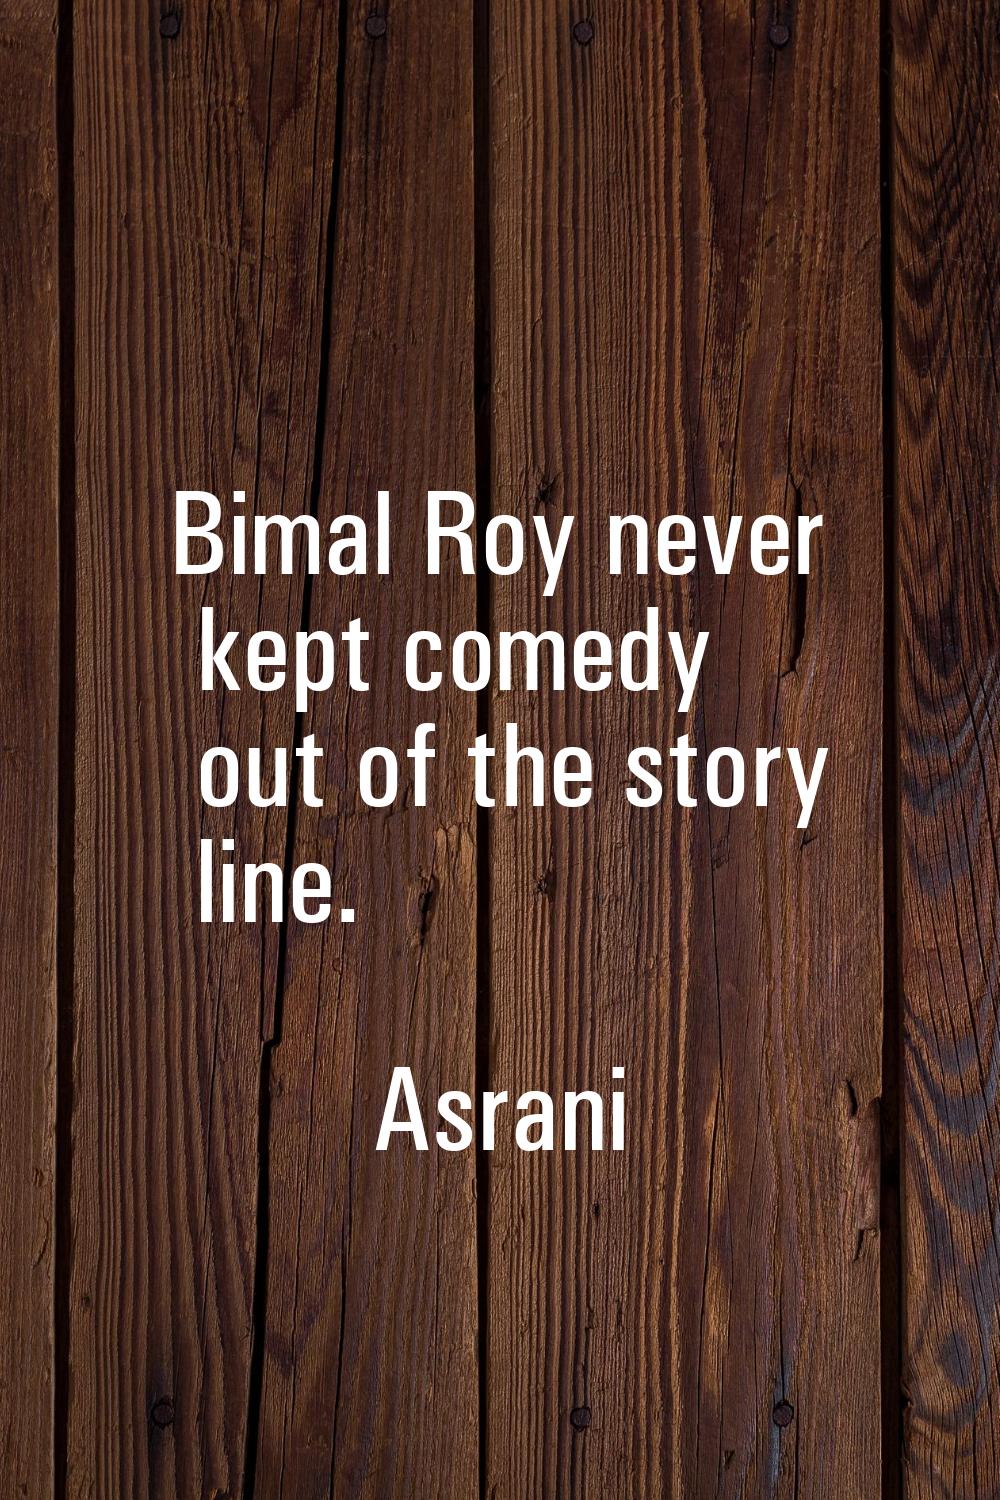 Bimal Roy never kept comedy out of the story line.